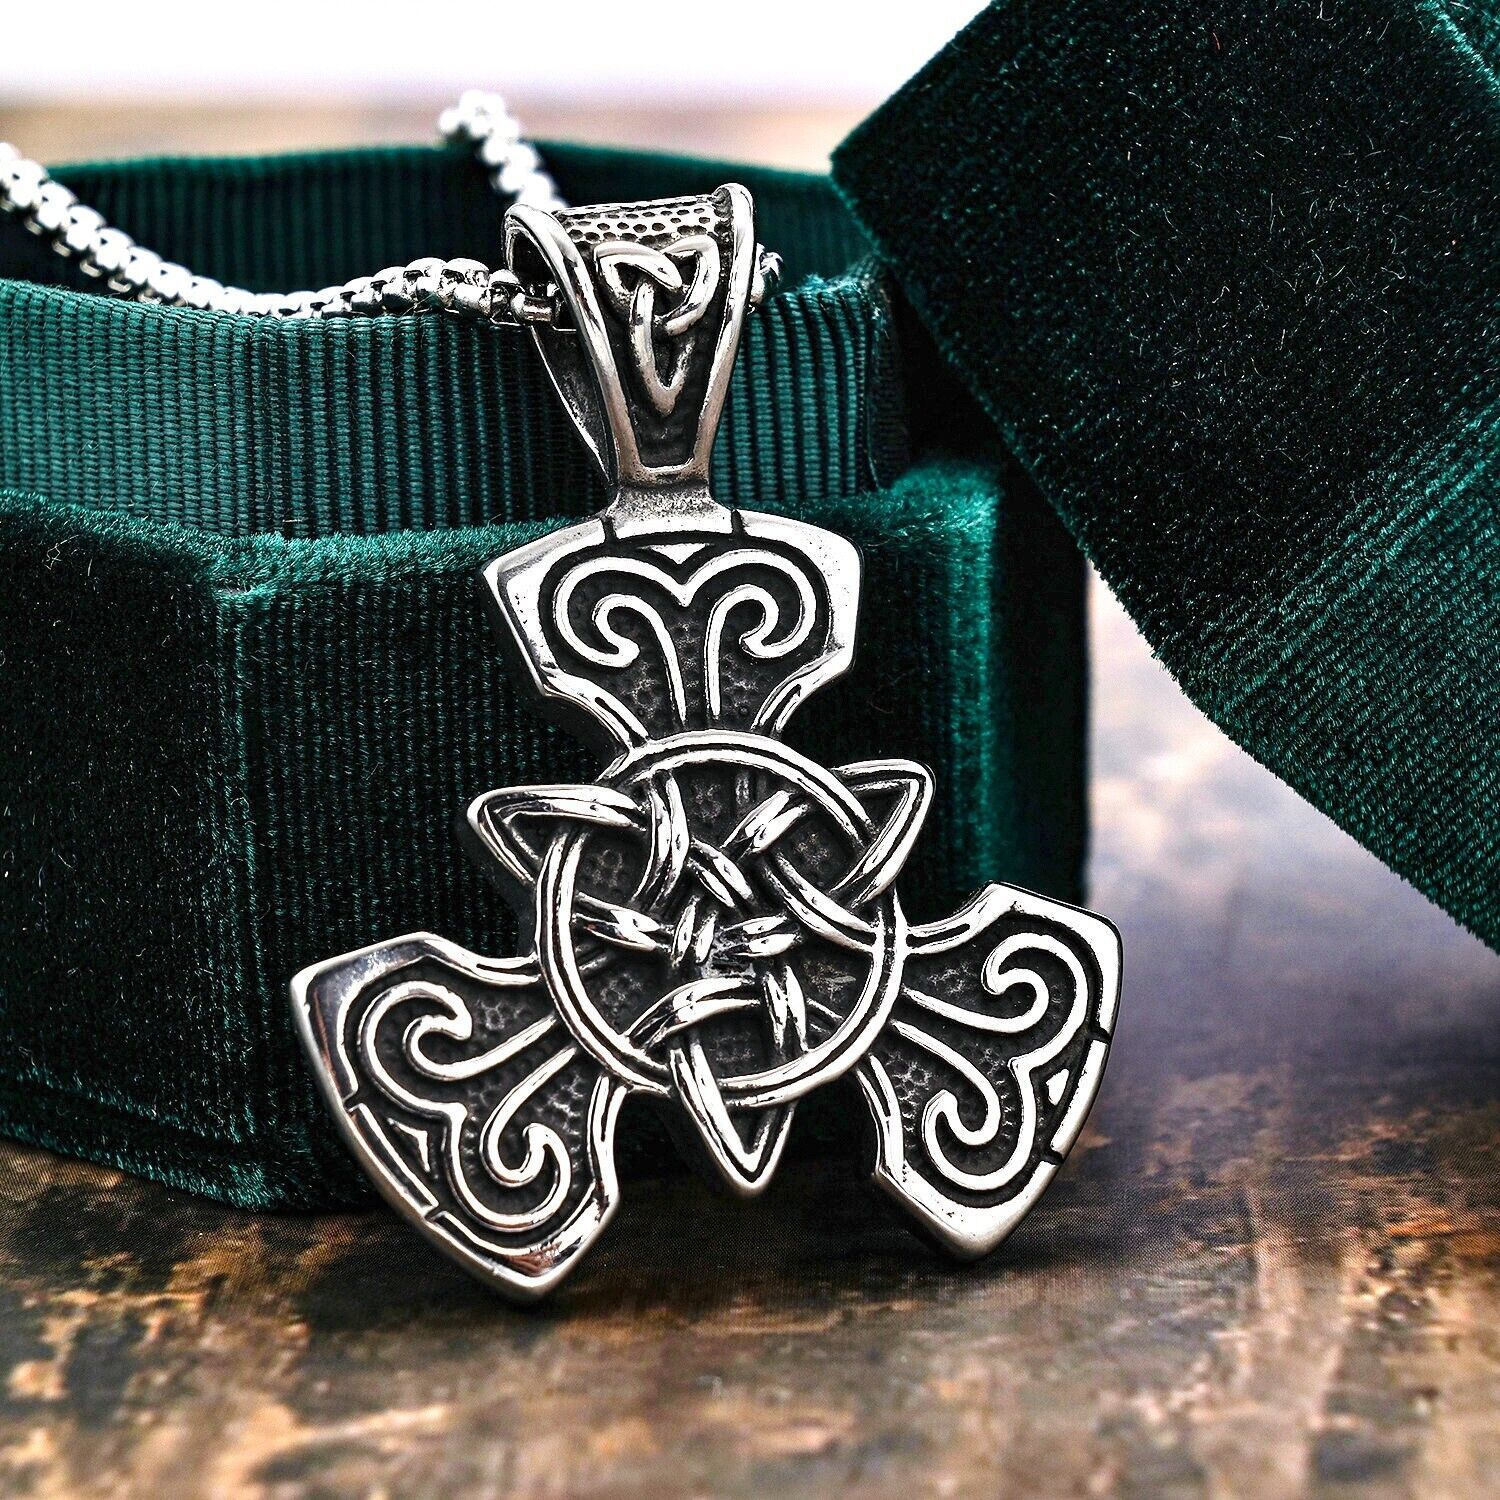 Primary image for Irish Celtic Triquetra Trinity Knot Pendant Necklace Men's Women's Jewelry Gift